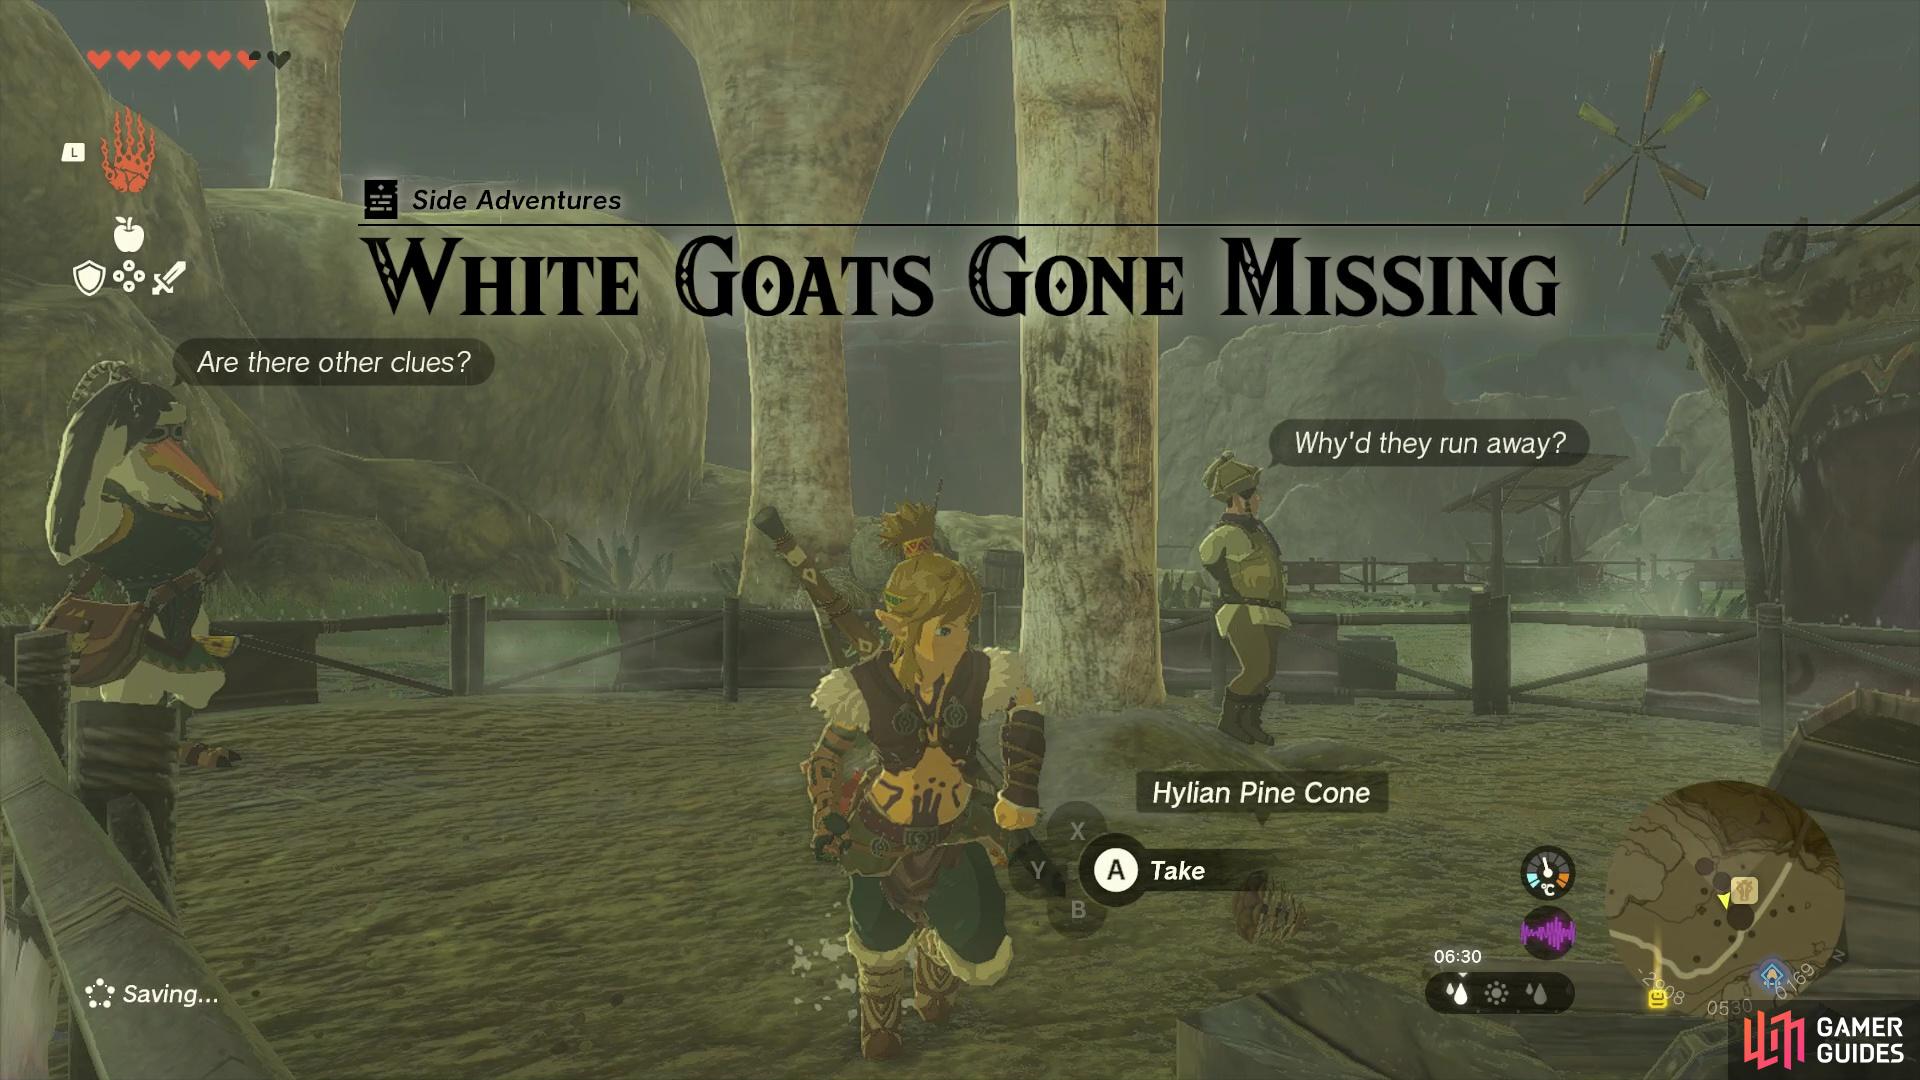 White Goats Gone Missing Side Adventure.